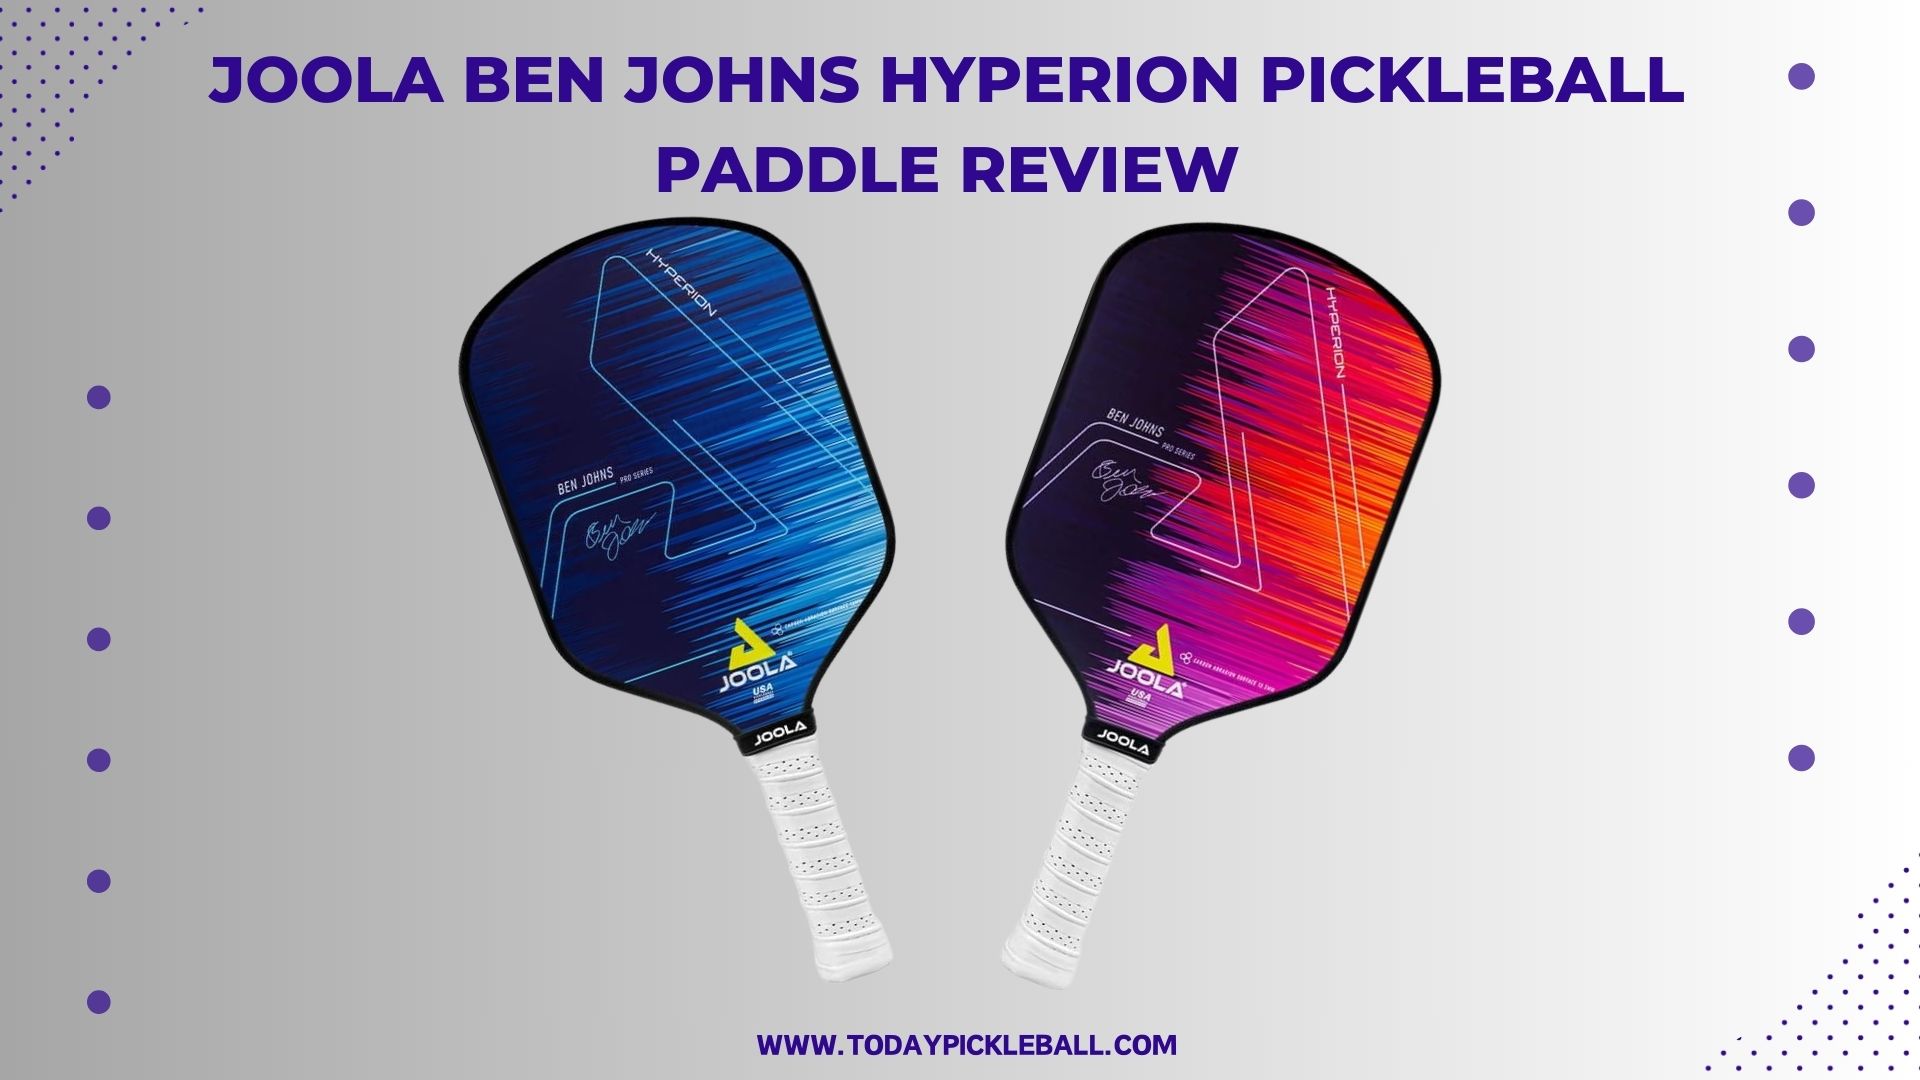 here is the image of some paddle to show Joola Ben Johns Hyperion Pickleball Paddle Review